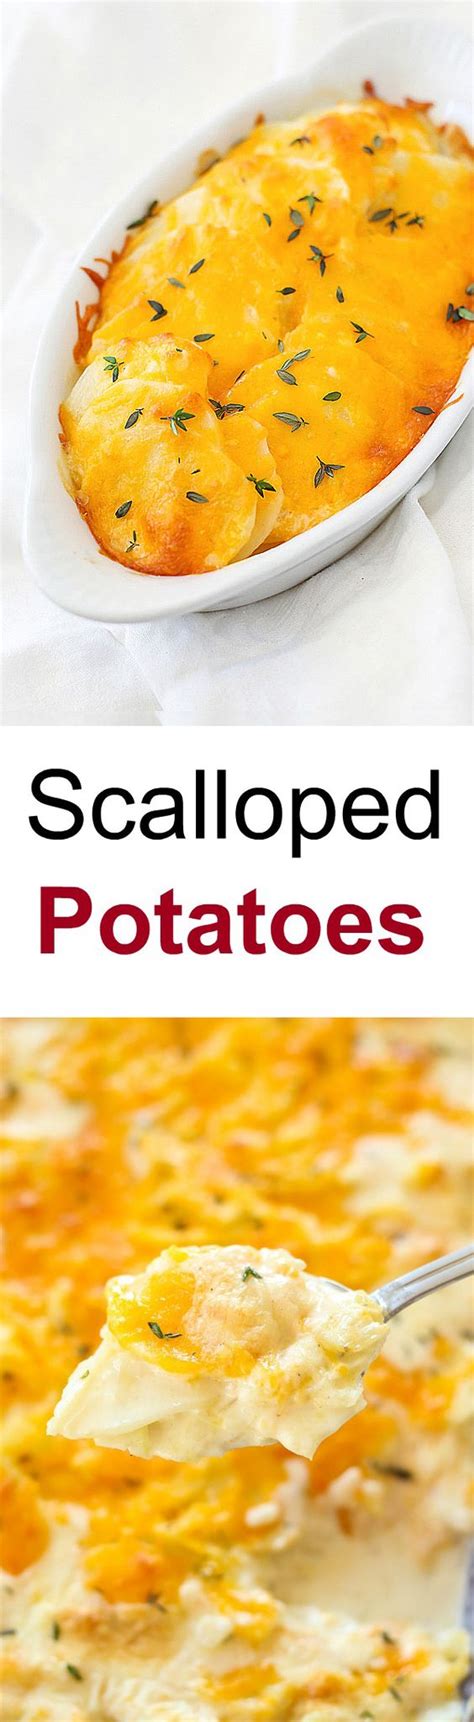 It's november 11th and we just got our first snow fall. Scalloped Potatoes | Easy Delicious Recipes